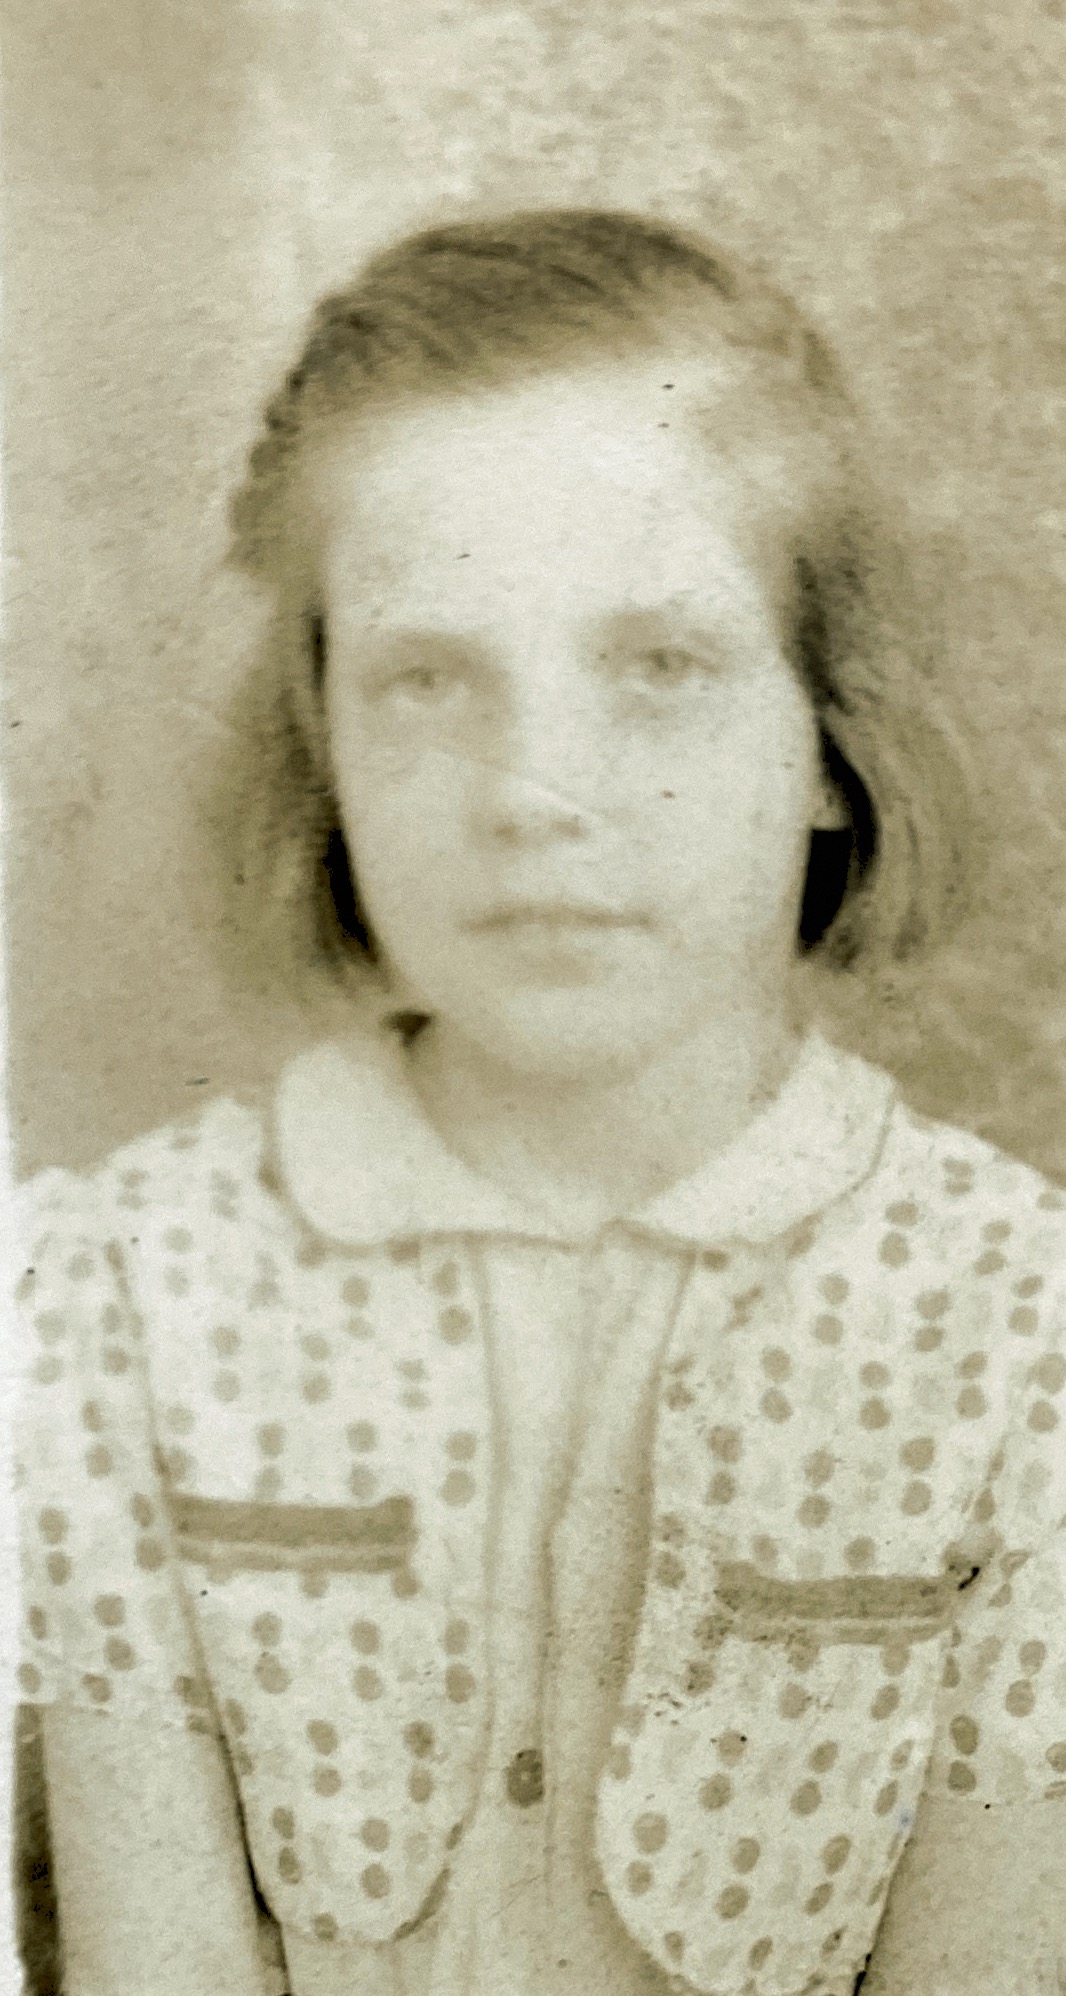 My Aunt Margaret’s School picture from 1943